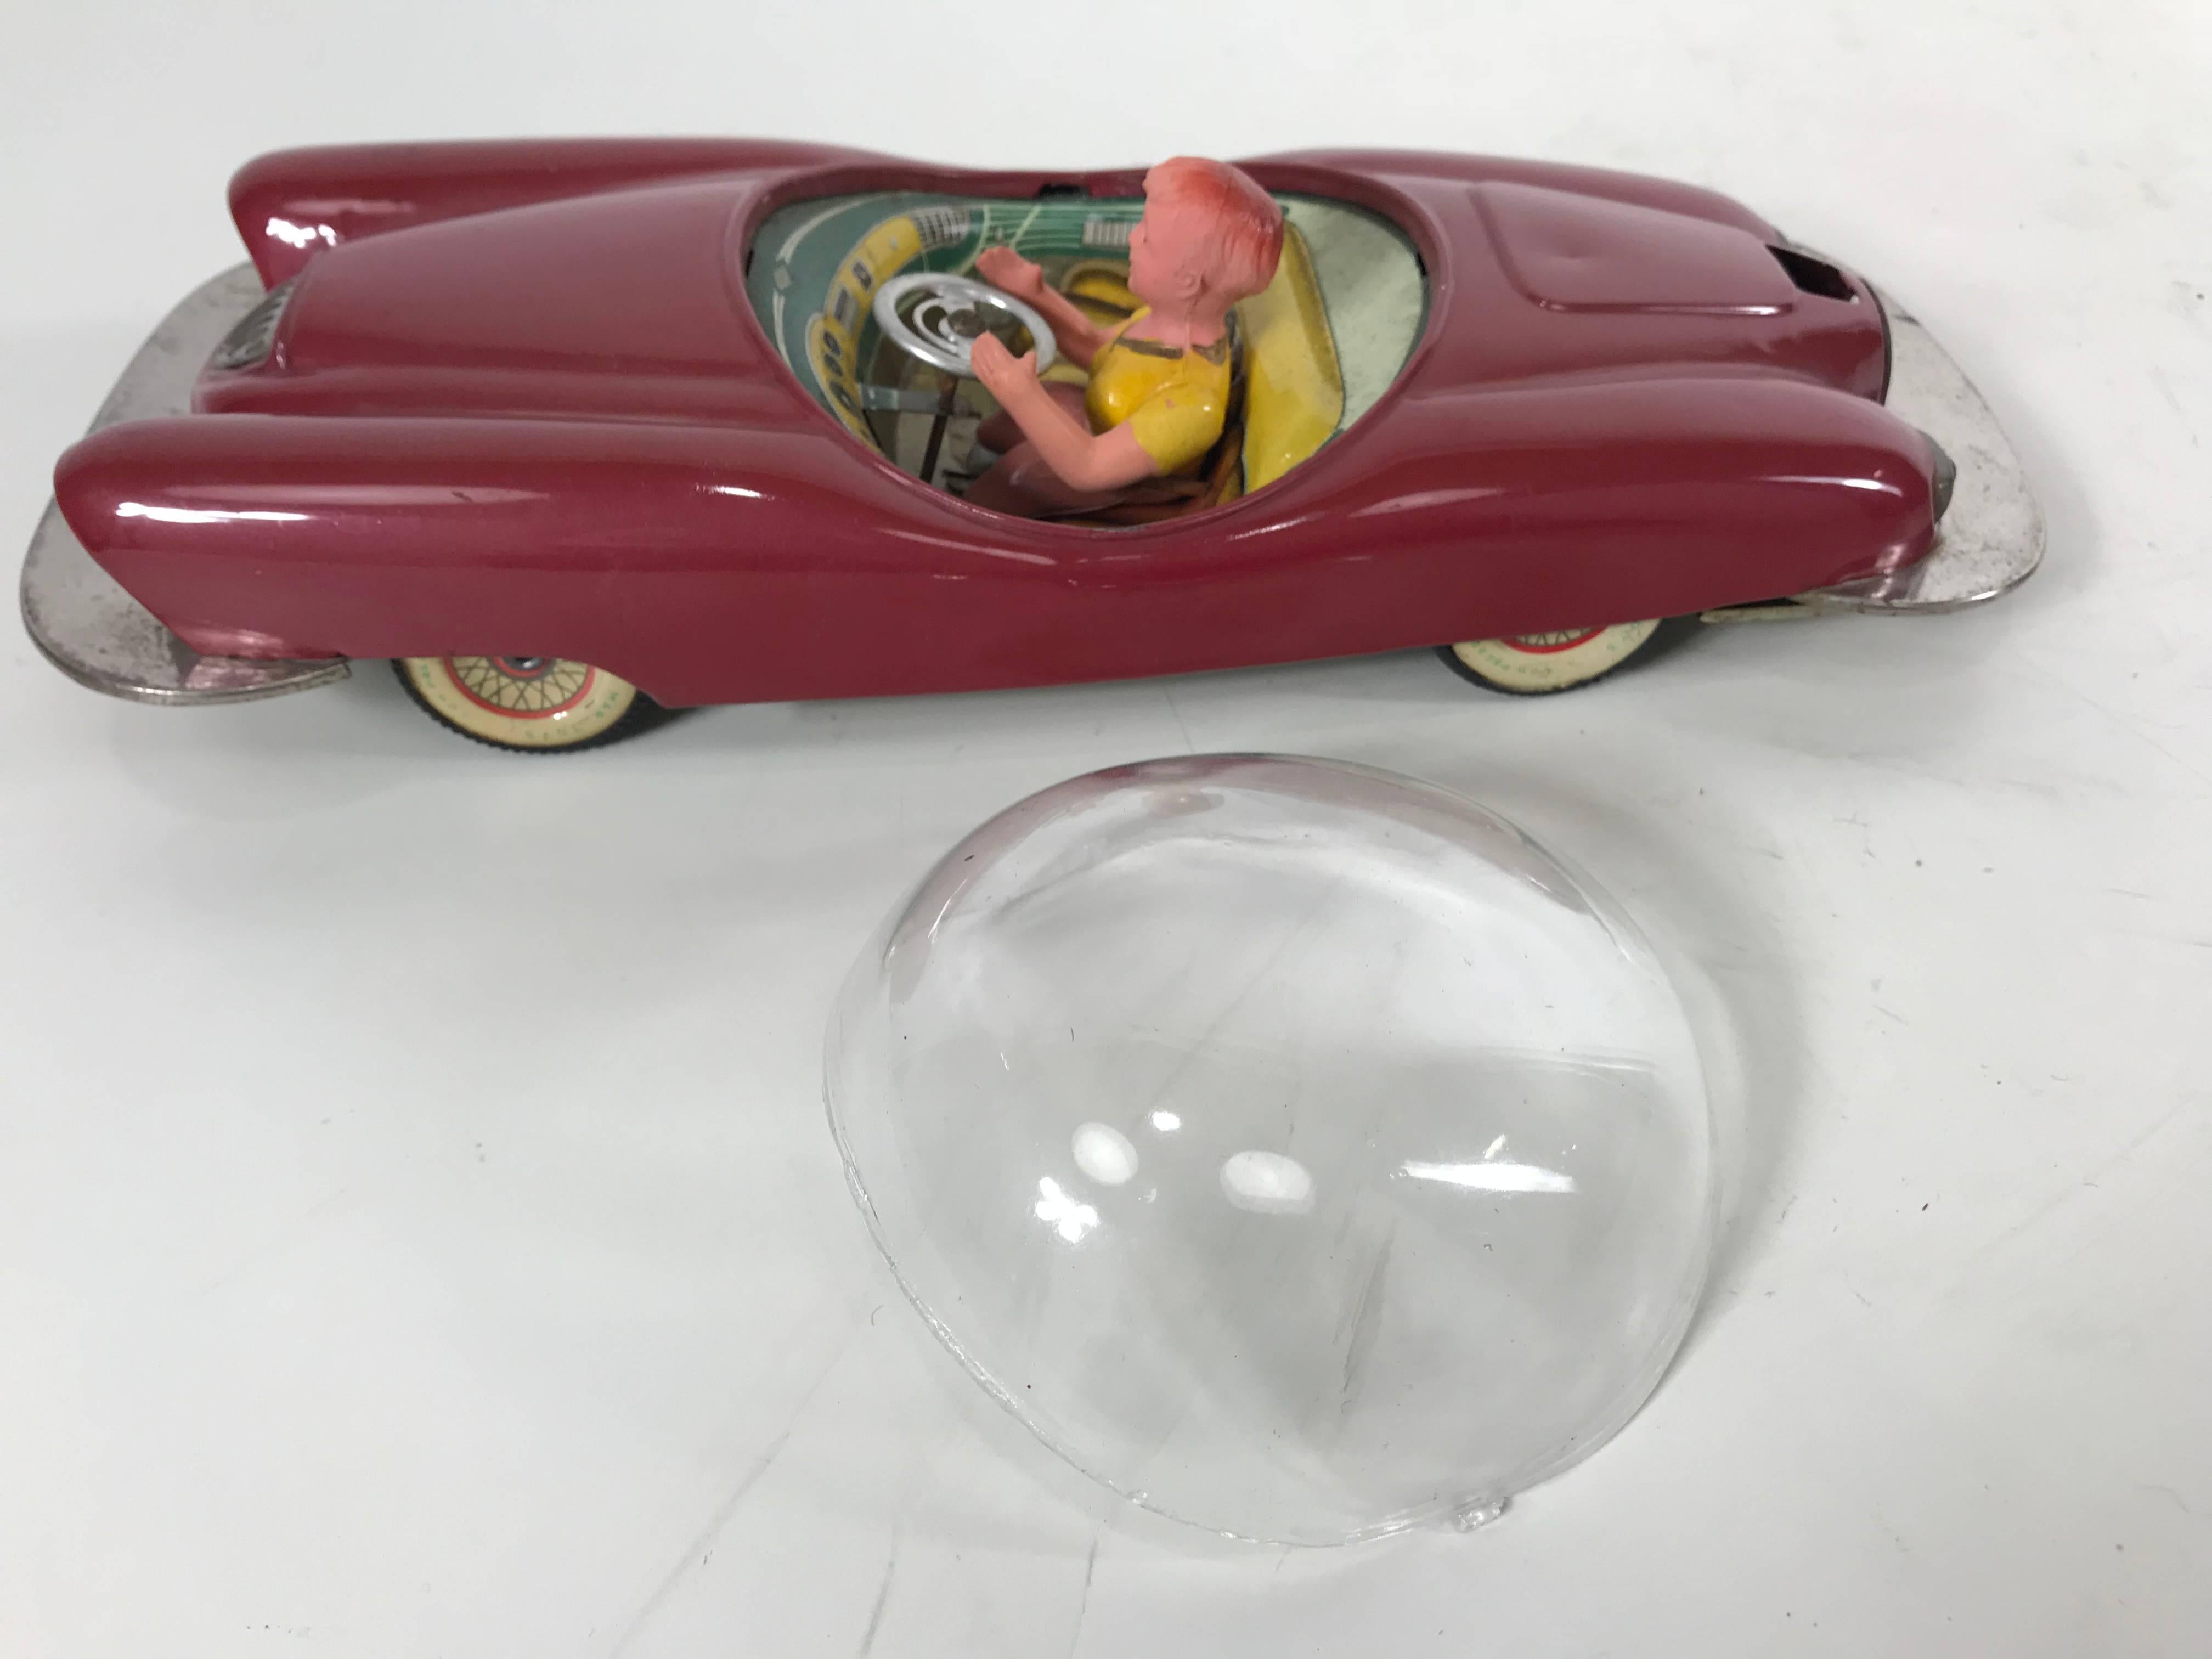 Mid-Century Modern Futuristic Roadster 1956 Japanese Tin Car Friction Toy by Line Mar